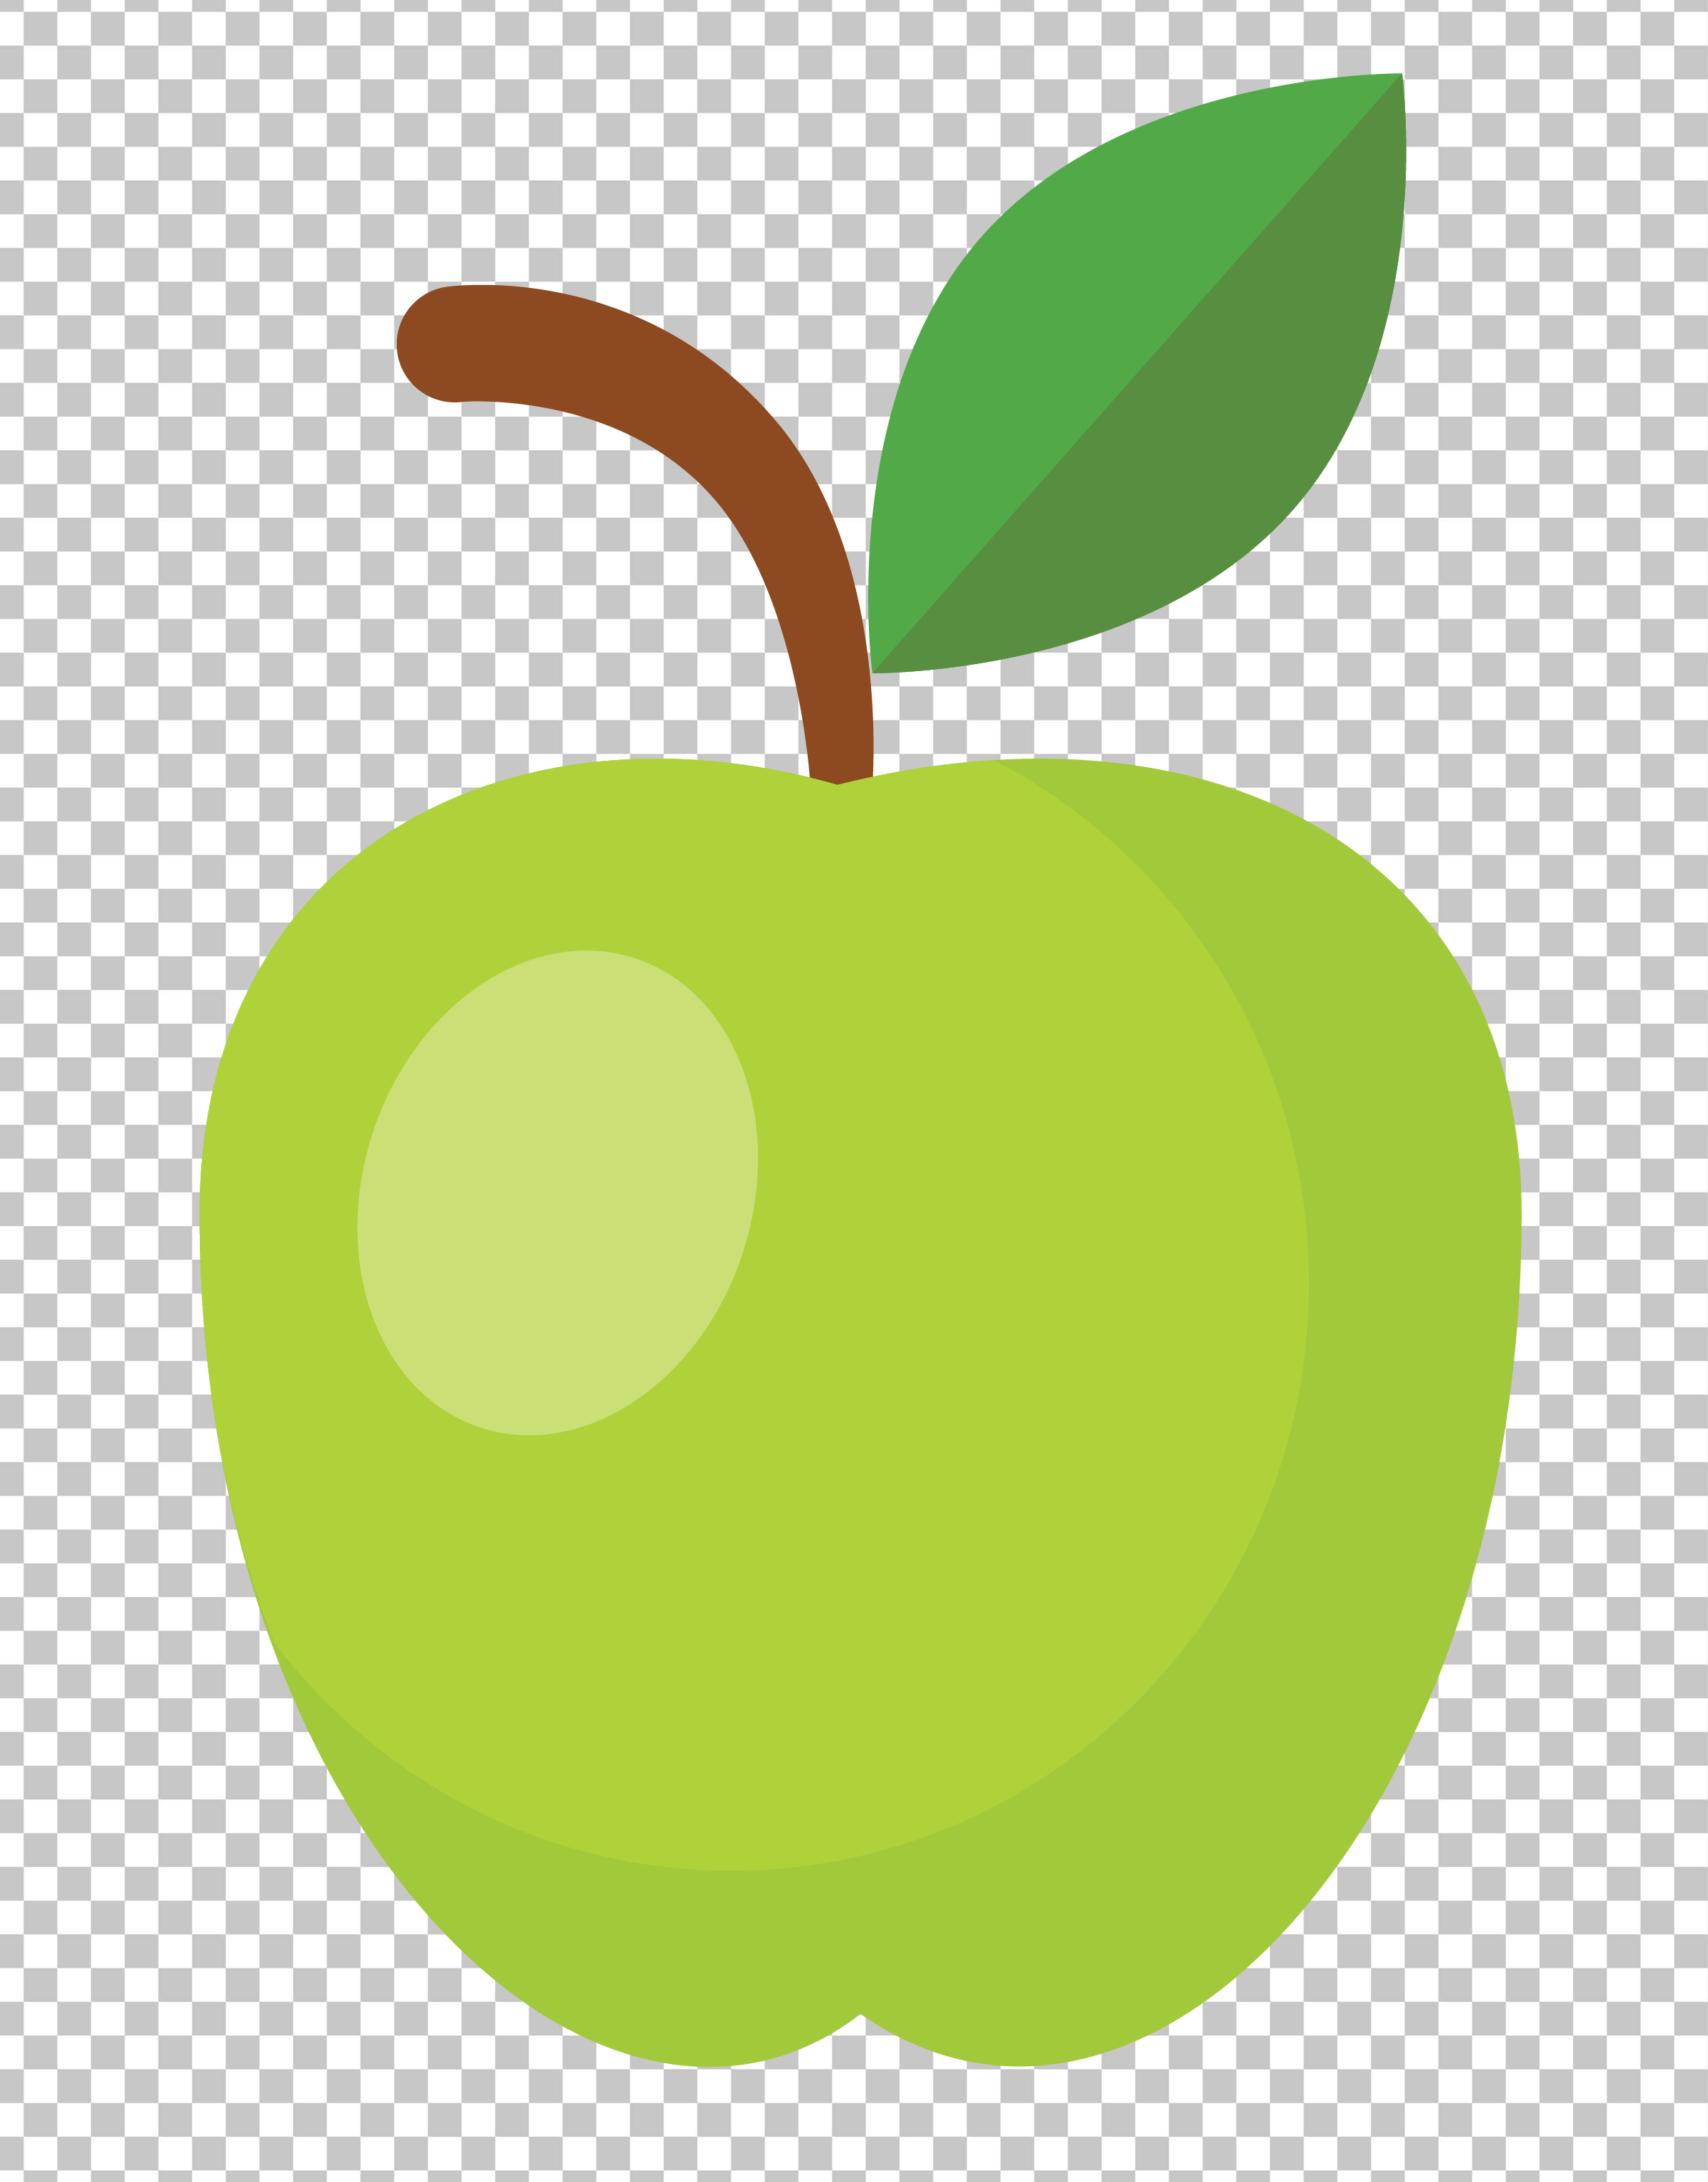 Green Apple with Leaf PNG Image.